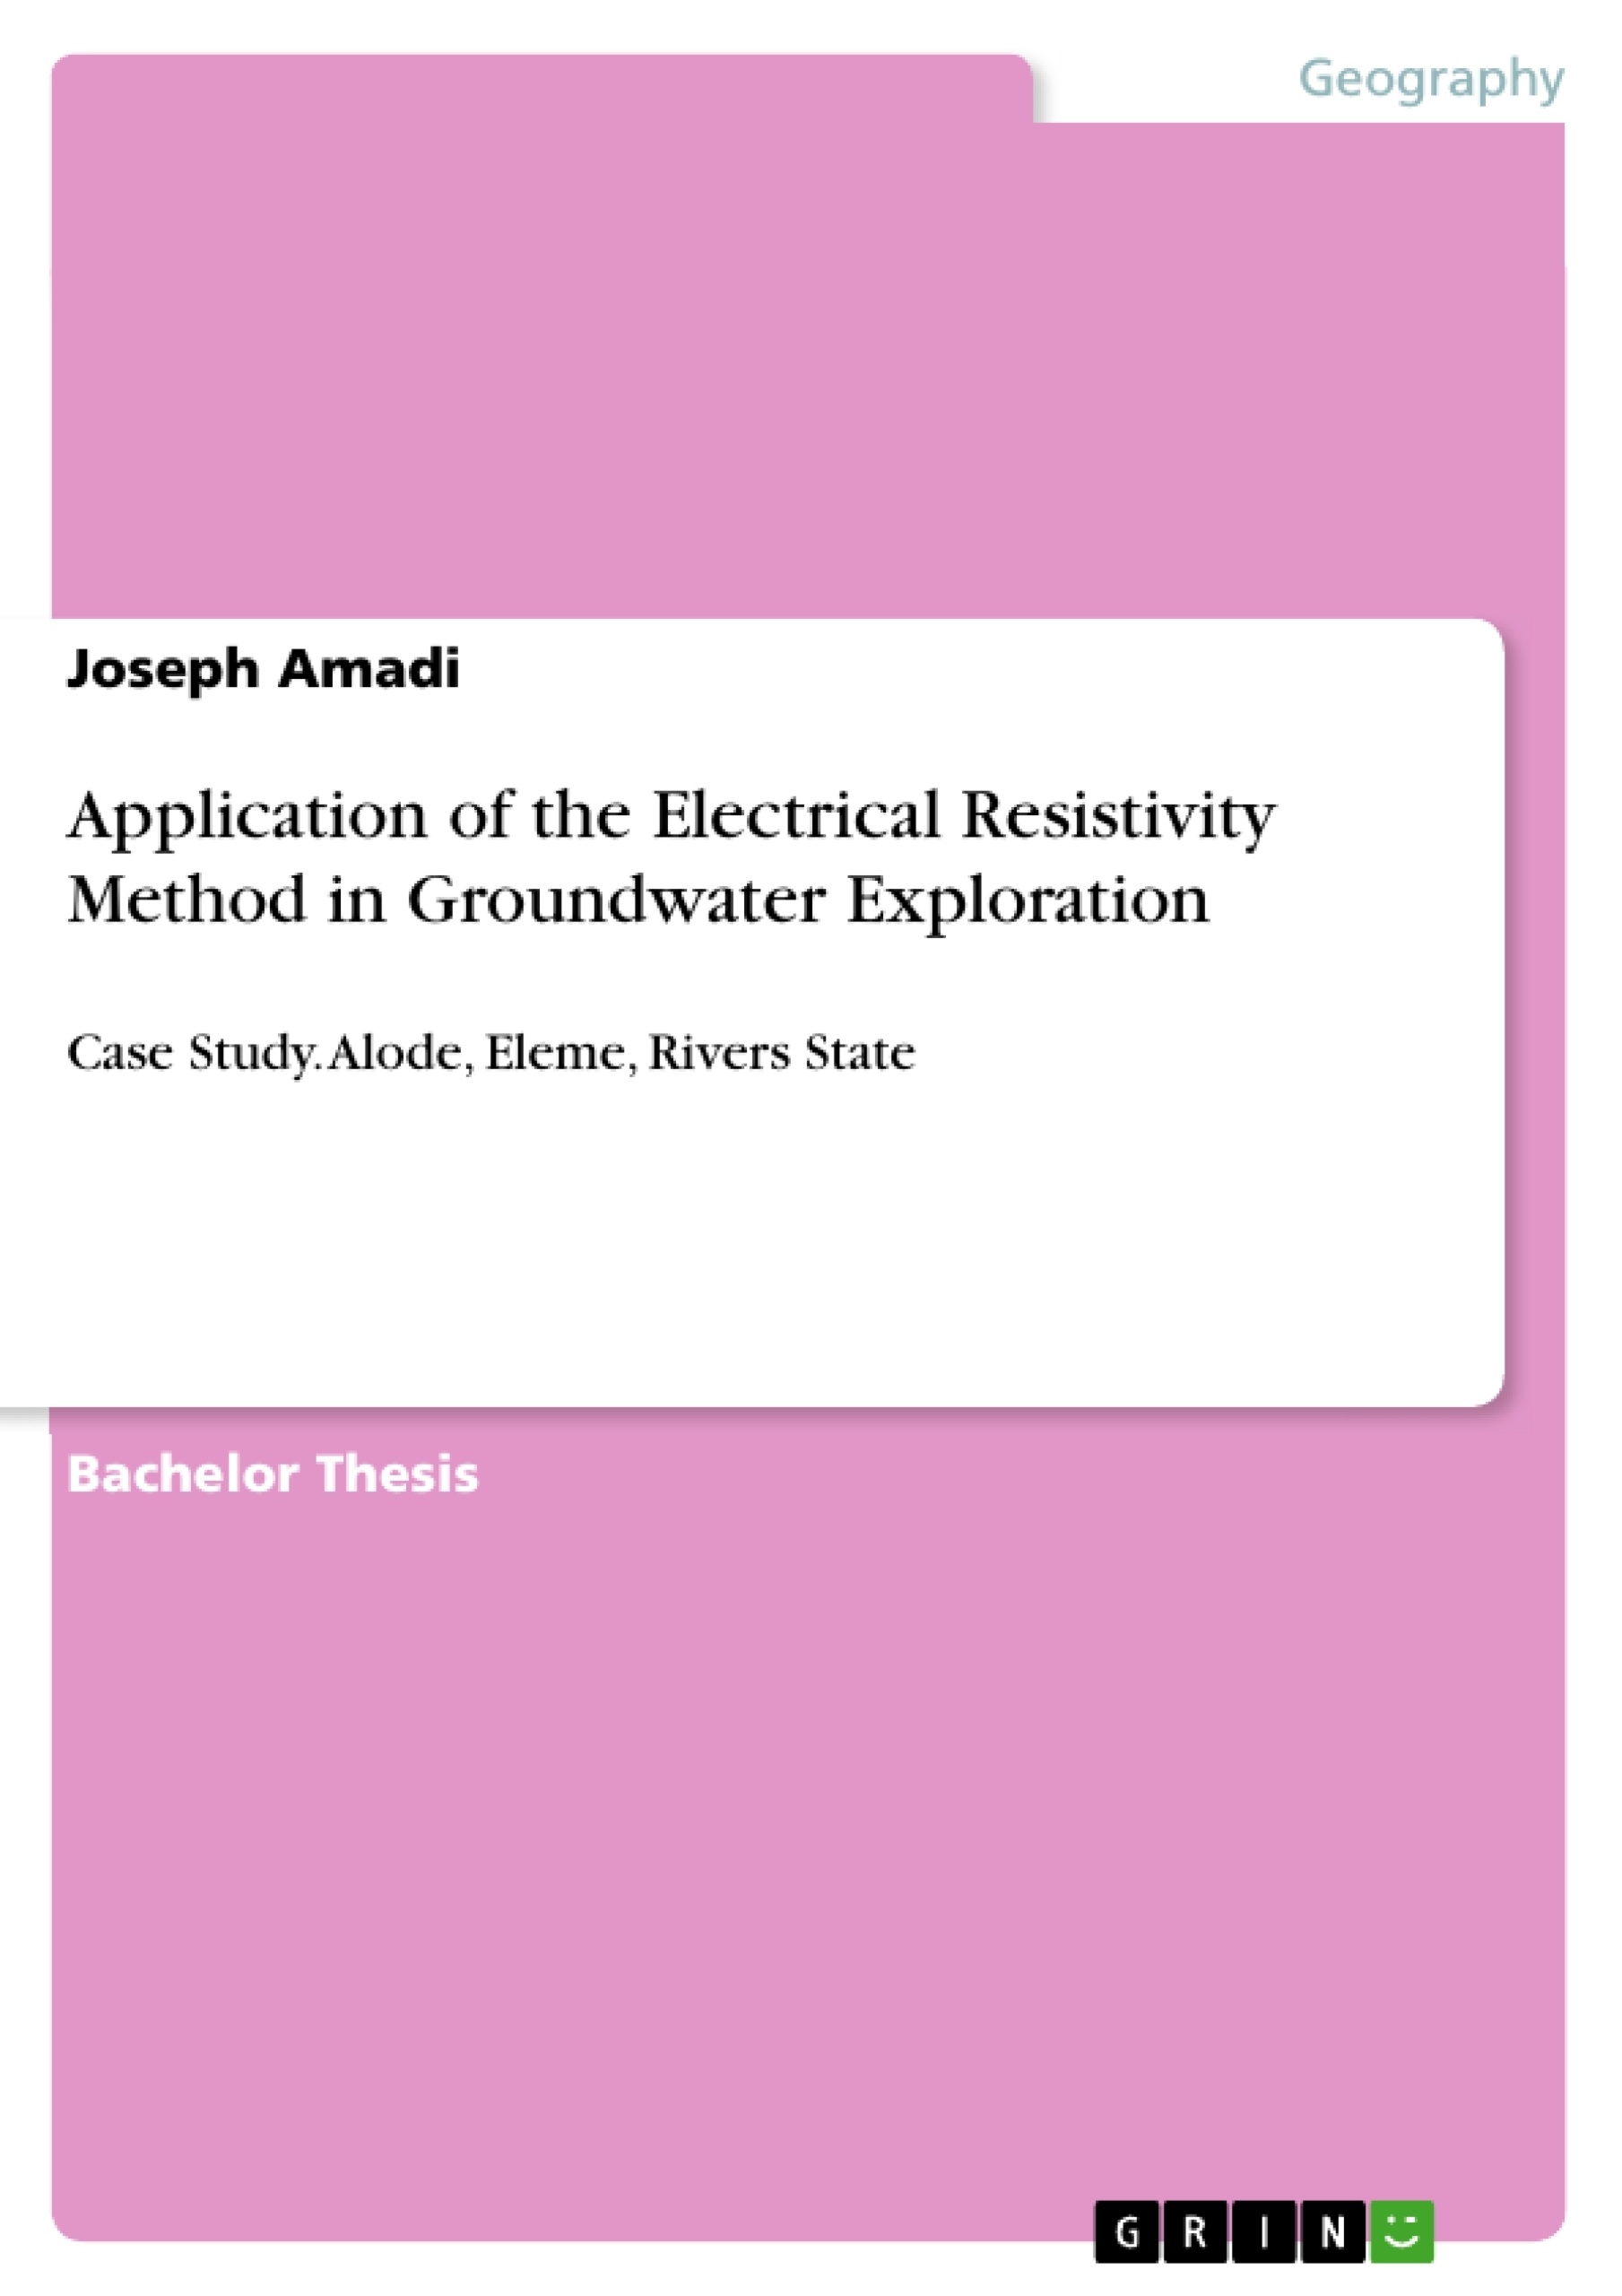 Título: Application of the Electrical Resistivity Method in Groundwater Exploration